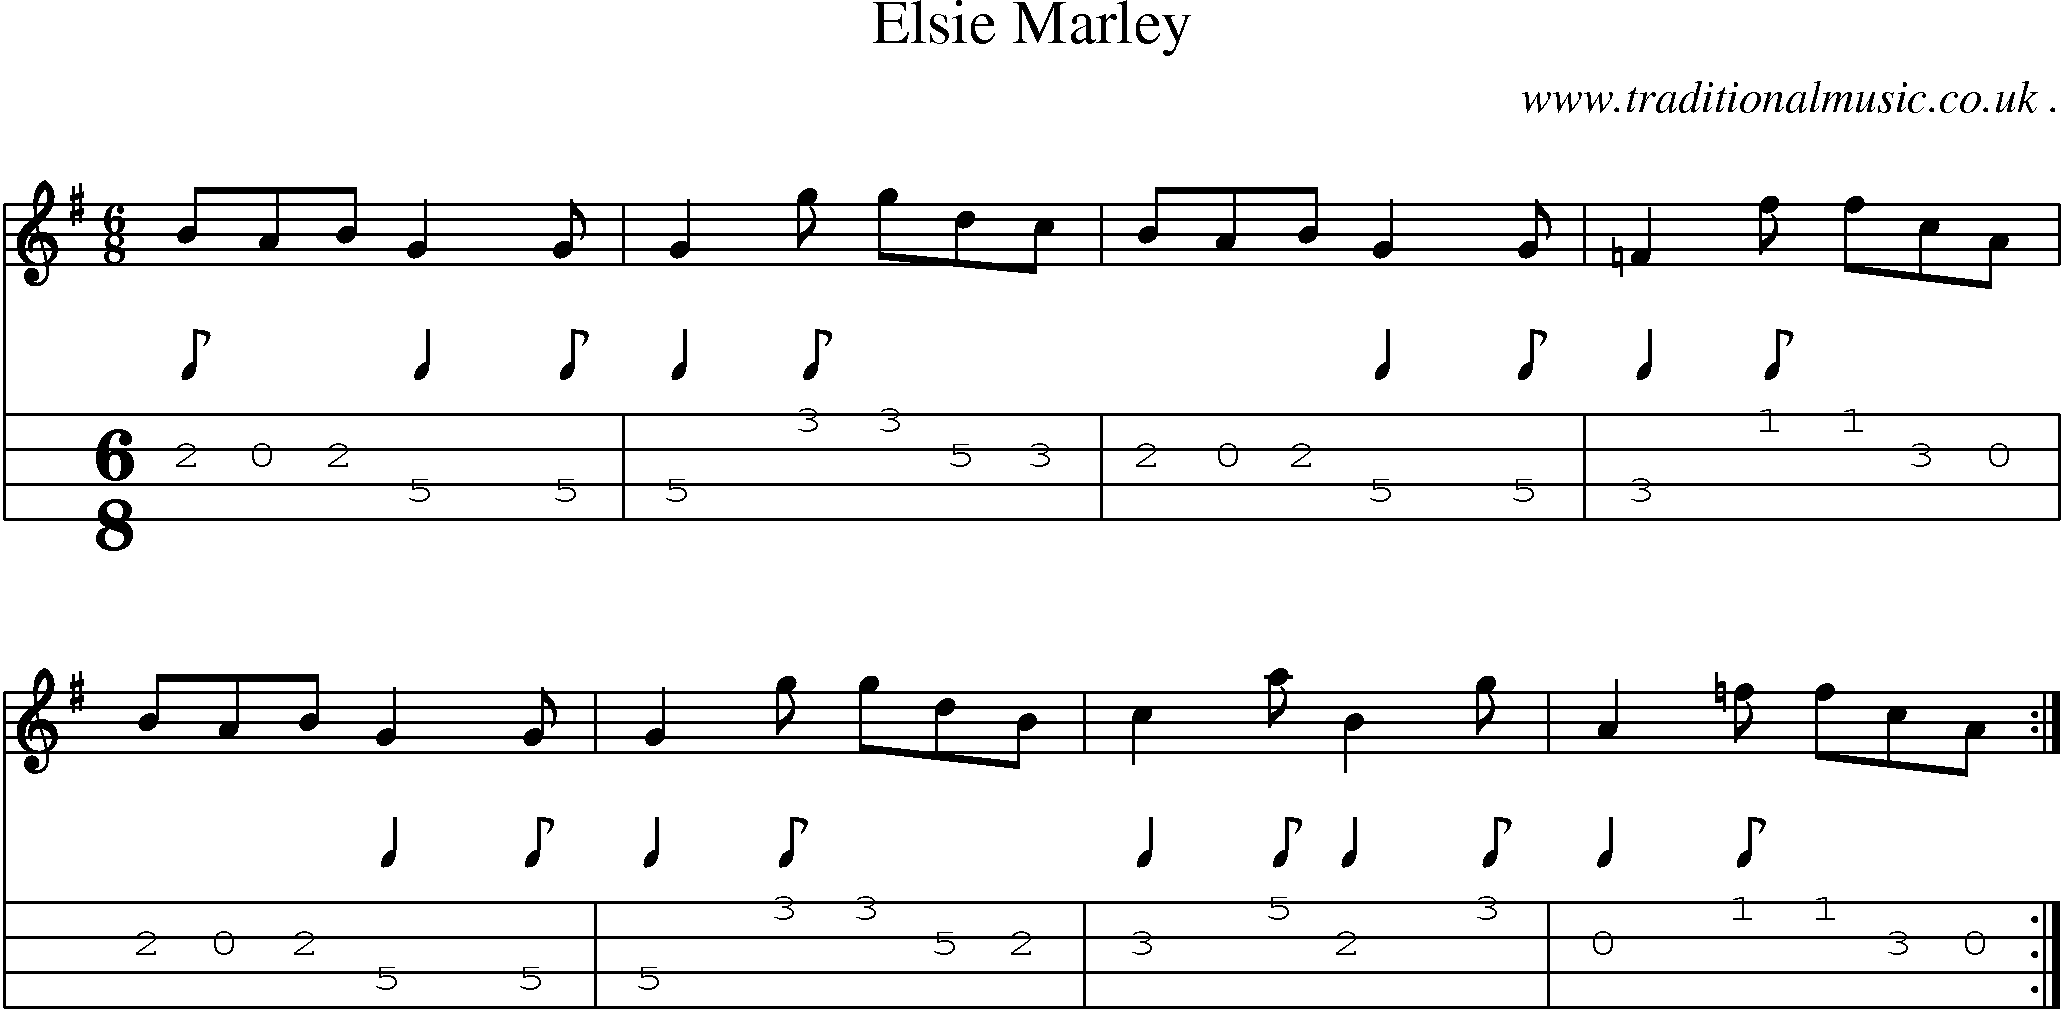 Sheet-music  score, Chords and Mandolin Tabs for Elsie Marley